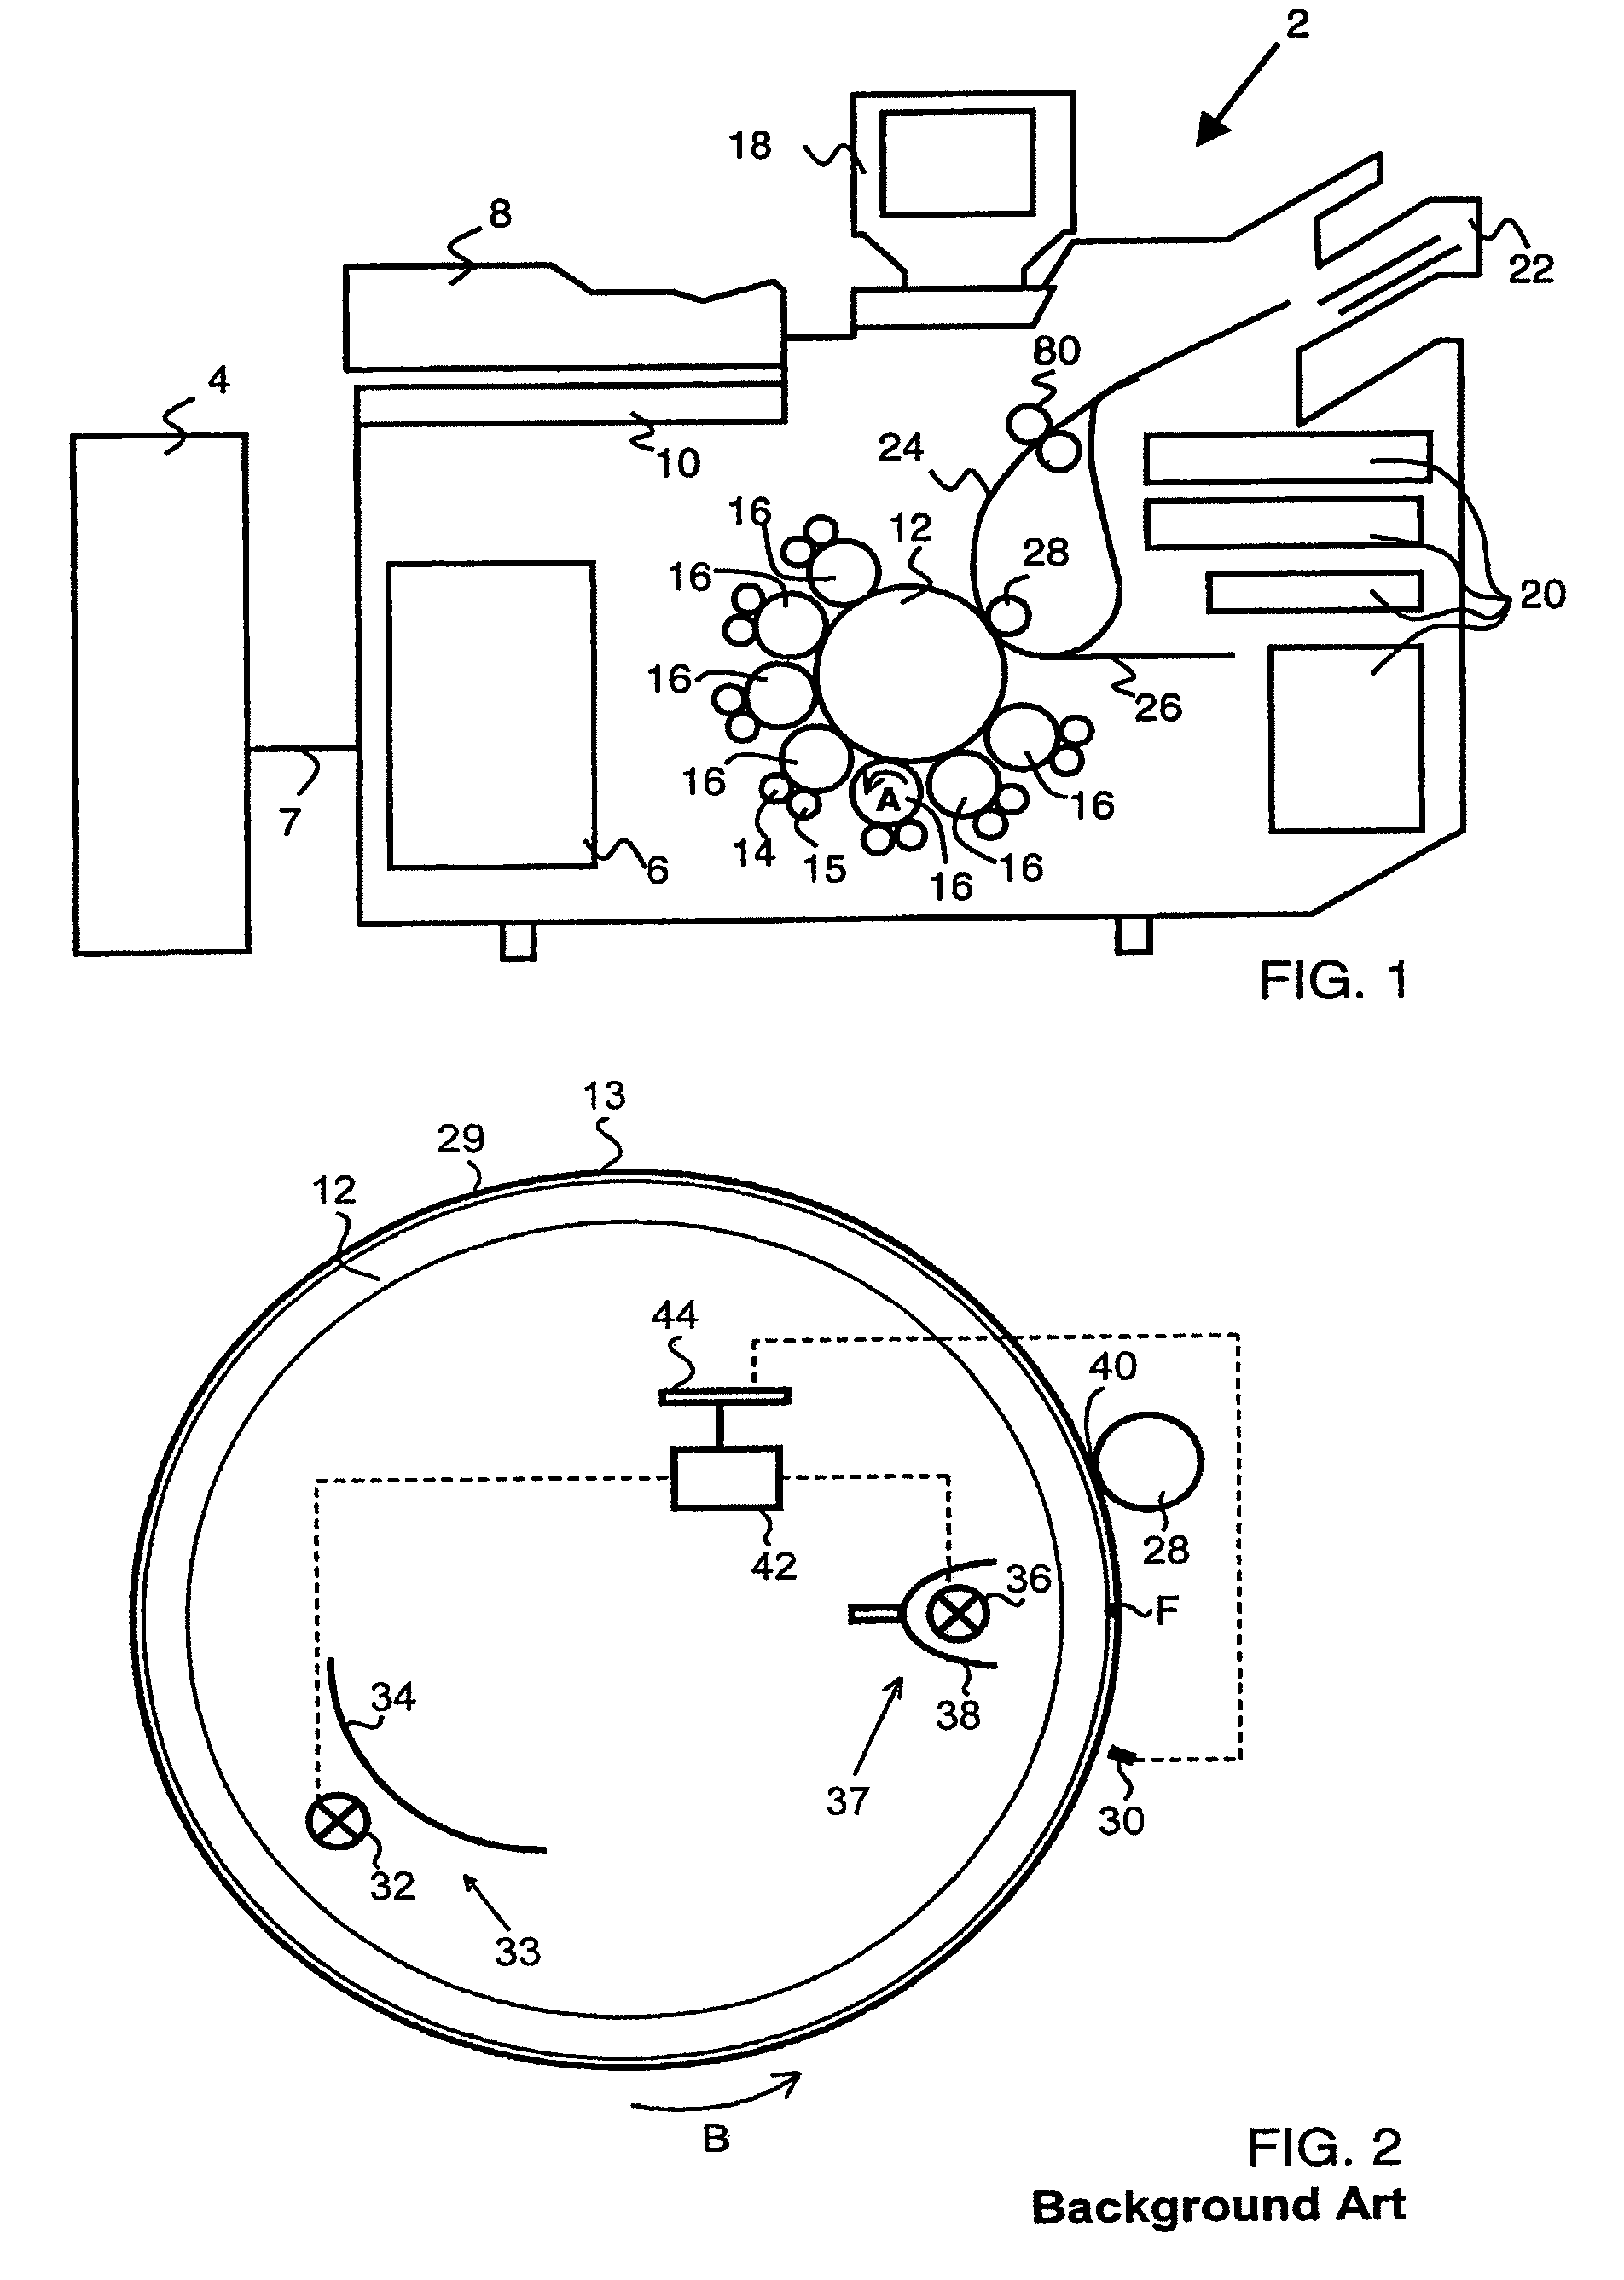 Transfer apparatus for transferring an image of a developer in a printer and method for calibrating the heating system thereof